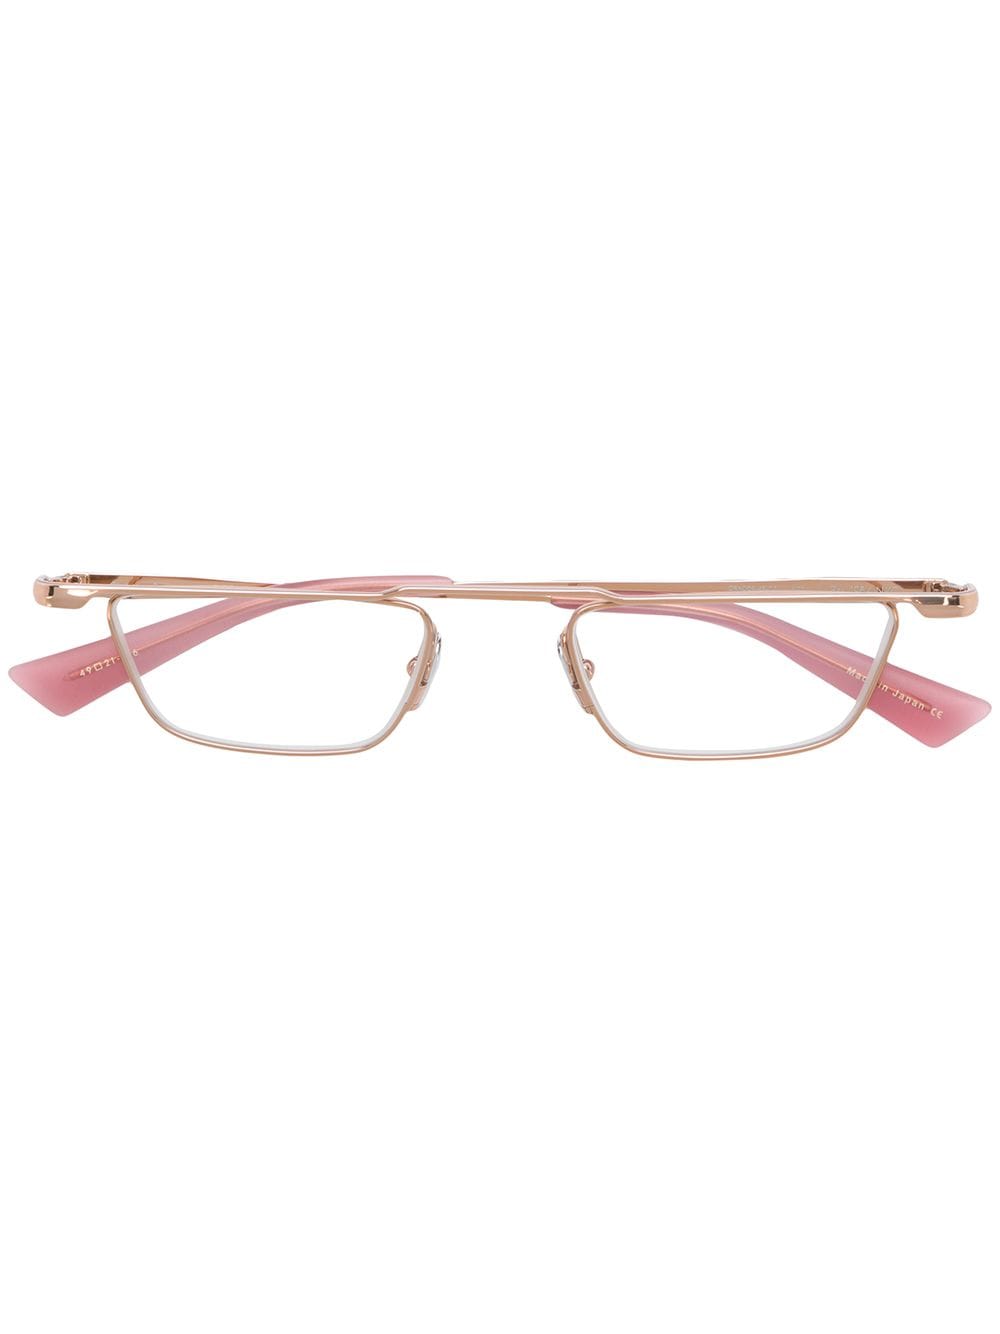 Christian Roth Geometric Glasses In Pink